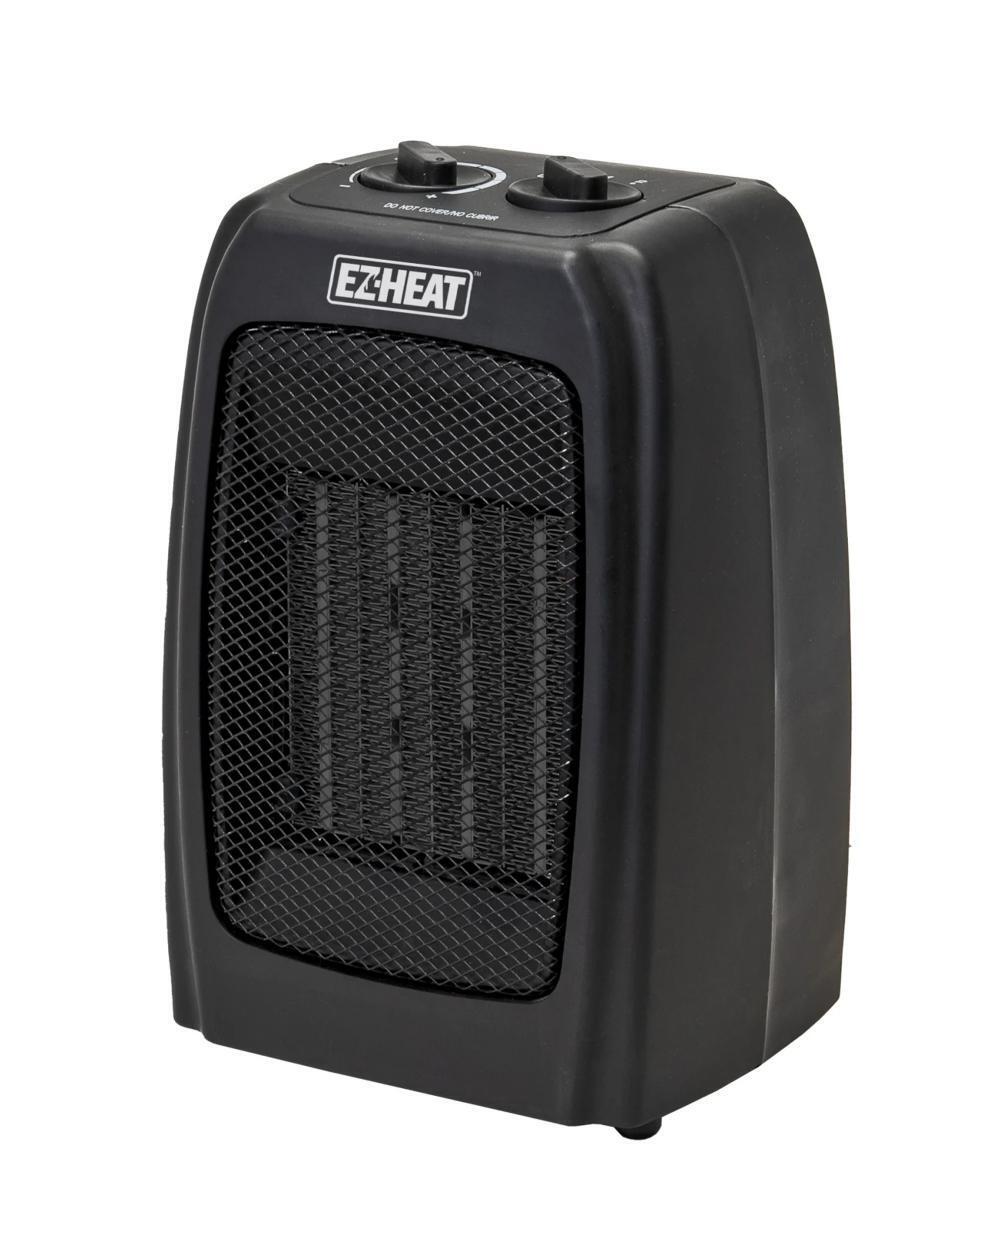 1500W [TIP-OVER PROTECTION+OSCILLATING] Portable Electric Ceramic Space Heater